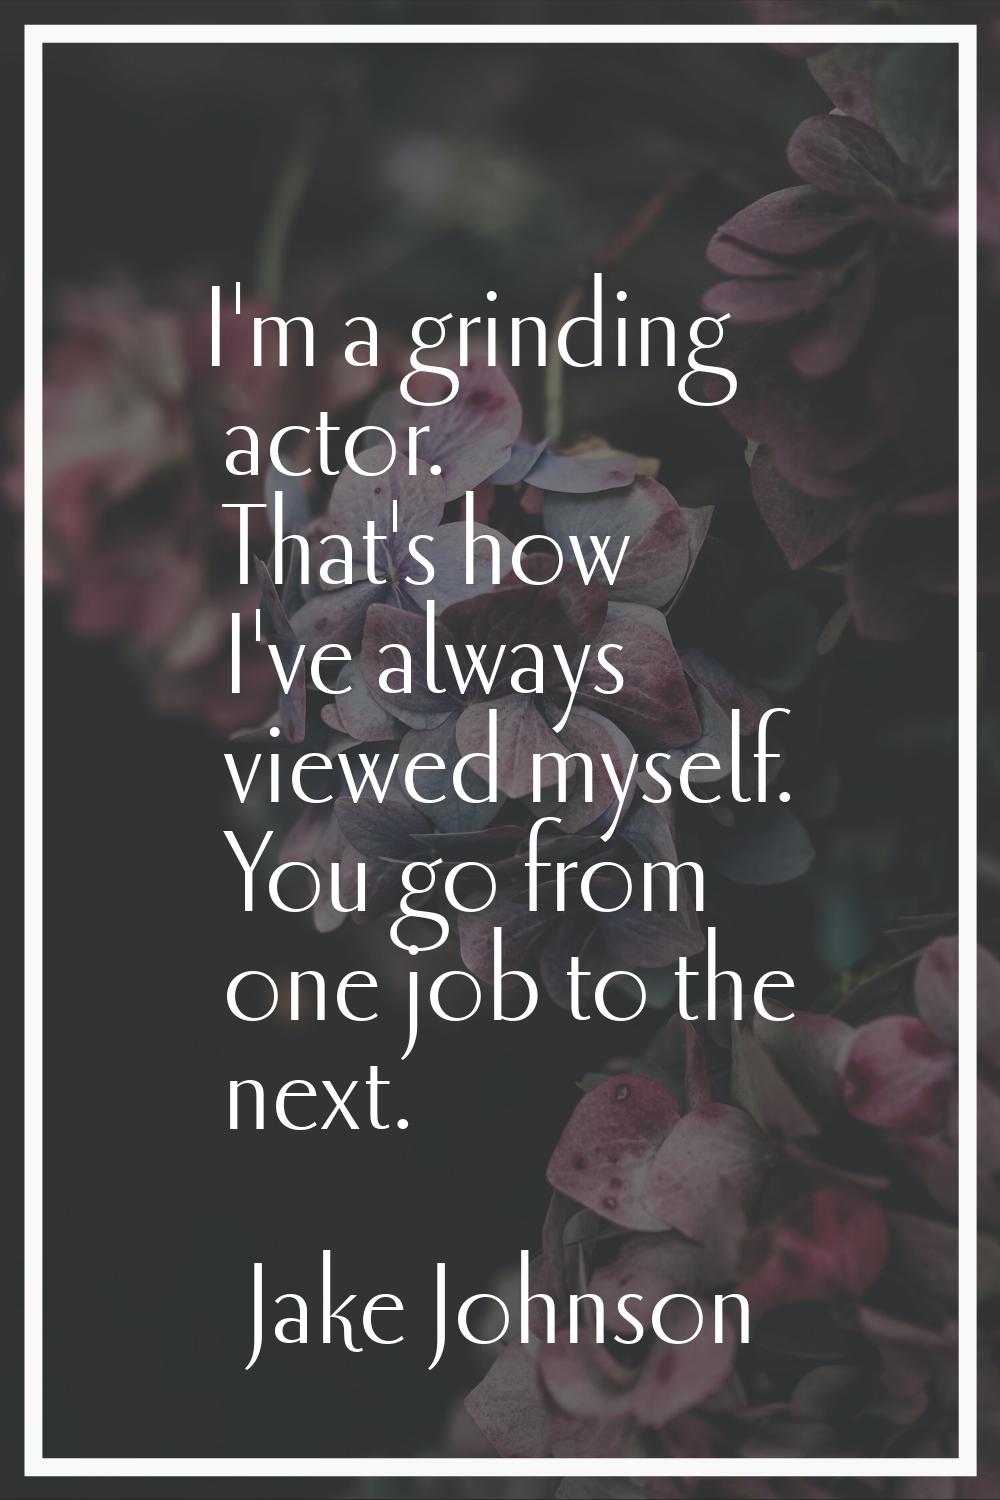 I'm a grinding actor. That's how I've always viewed myself. You go from one job to the next.